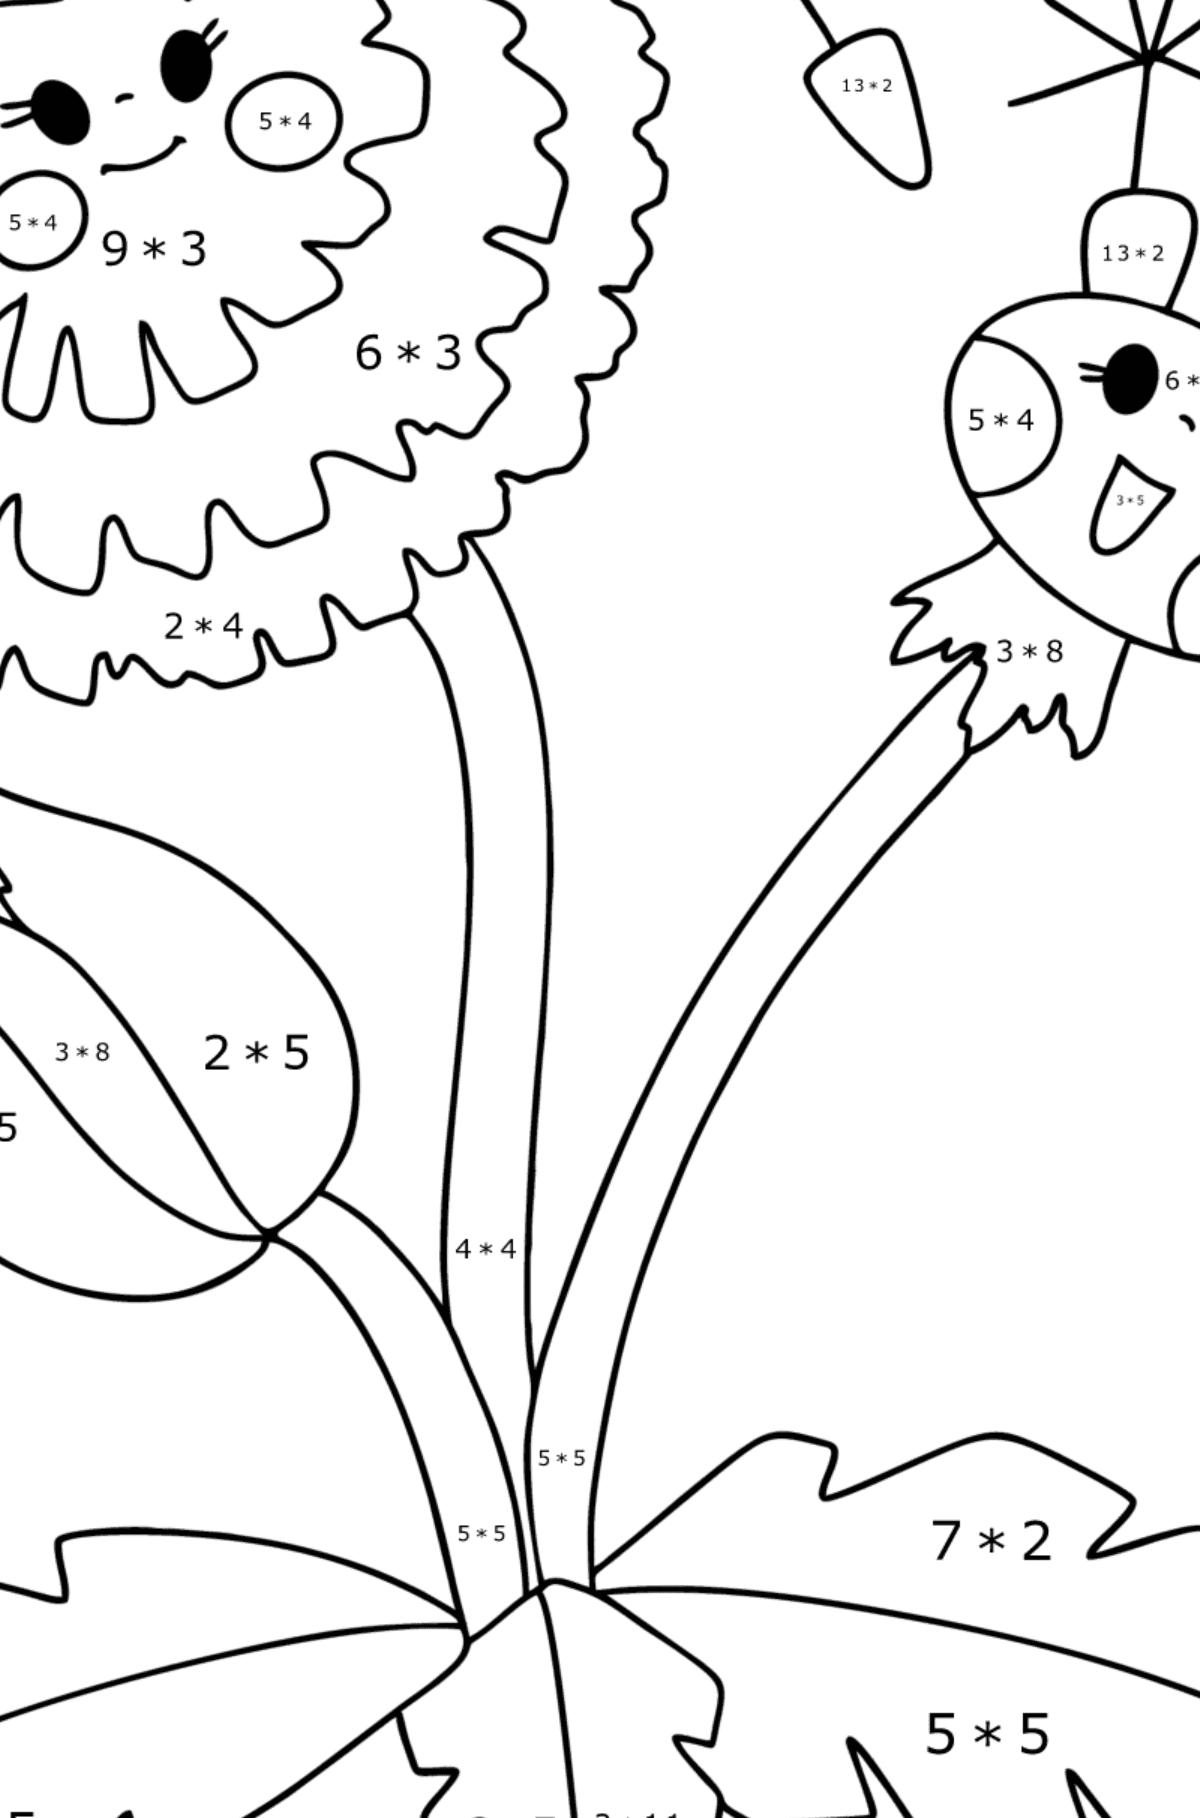 Dandelion with eyes coloring page - Math Coloring - Multiplication for Kids